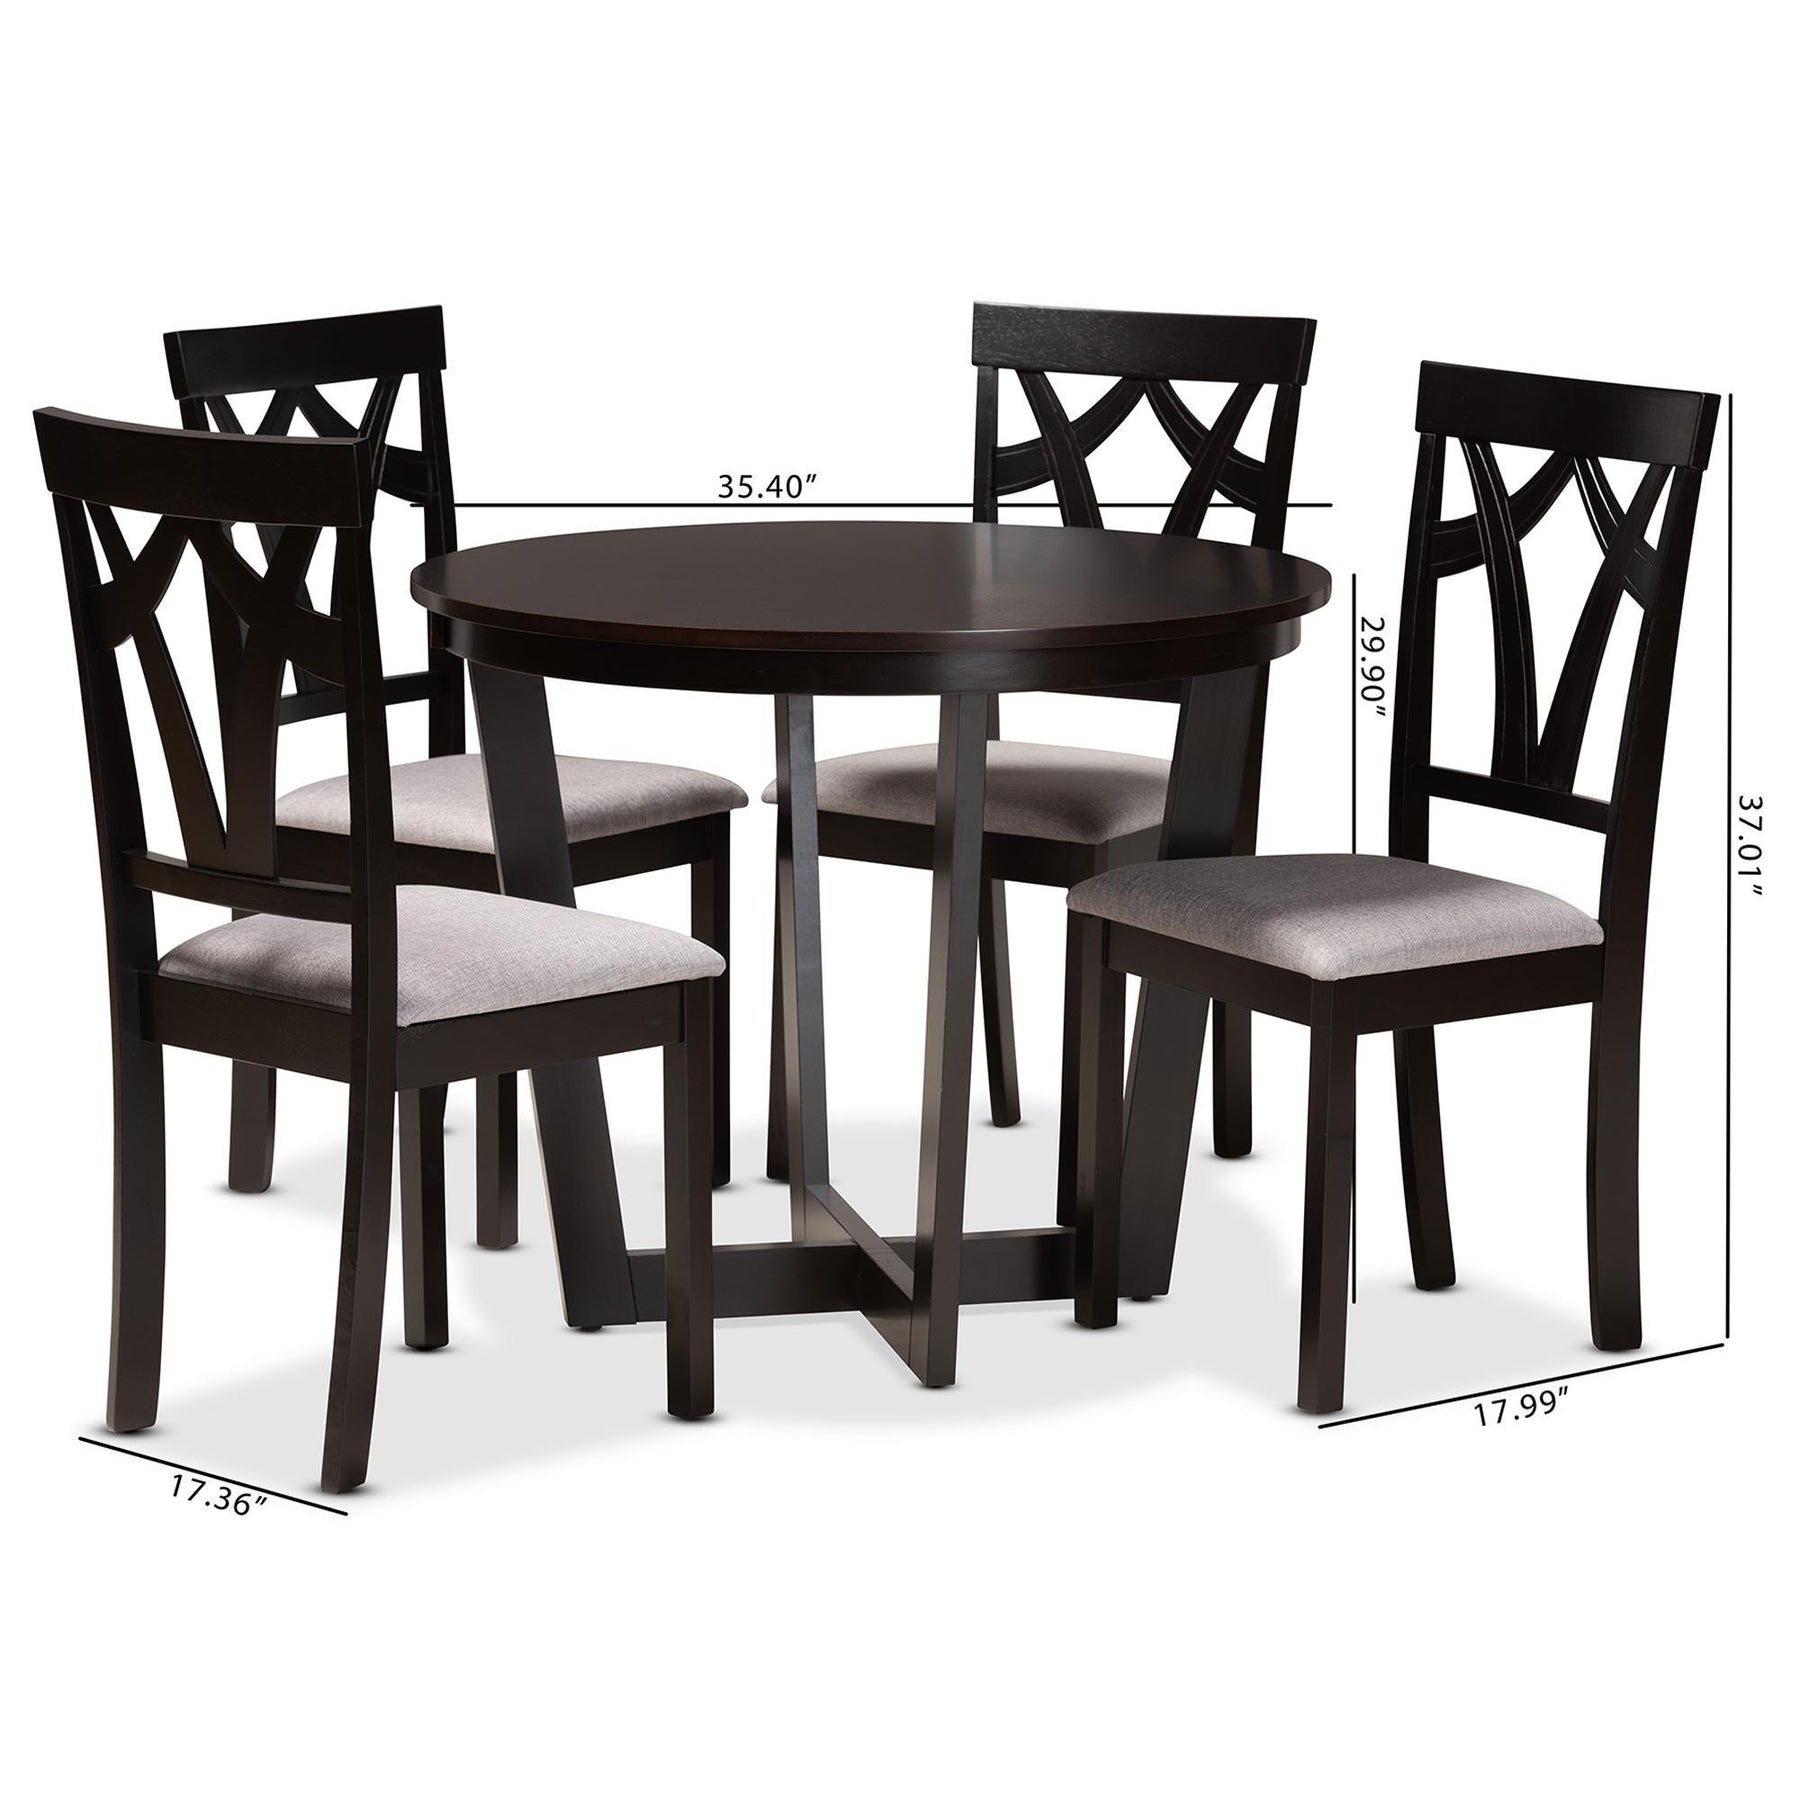 Baxton Studio Telma Modern And Contemporary Grey Fabric Upholstered And Dark Brown Finished Wood 5-Piece Dining Set - Telma-Grey/Dark Brown-5PC Dining Set